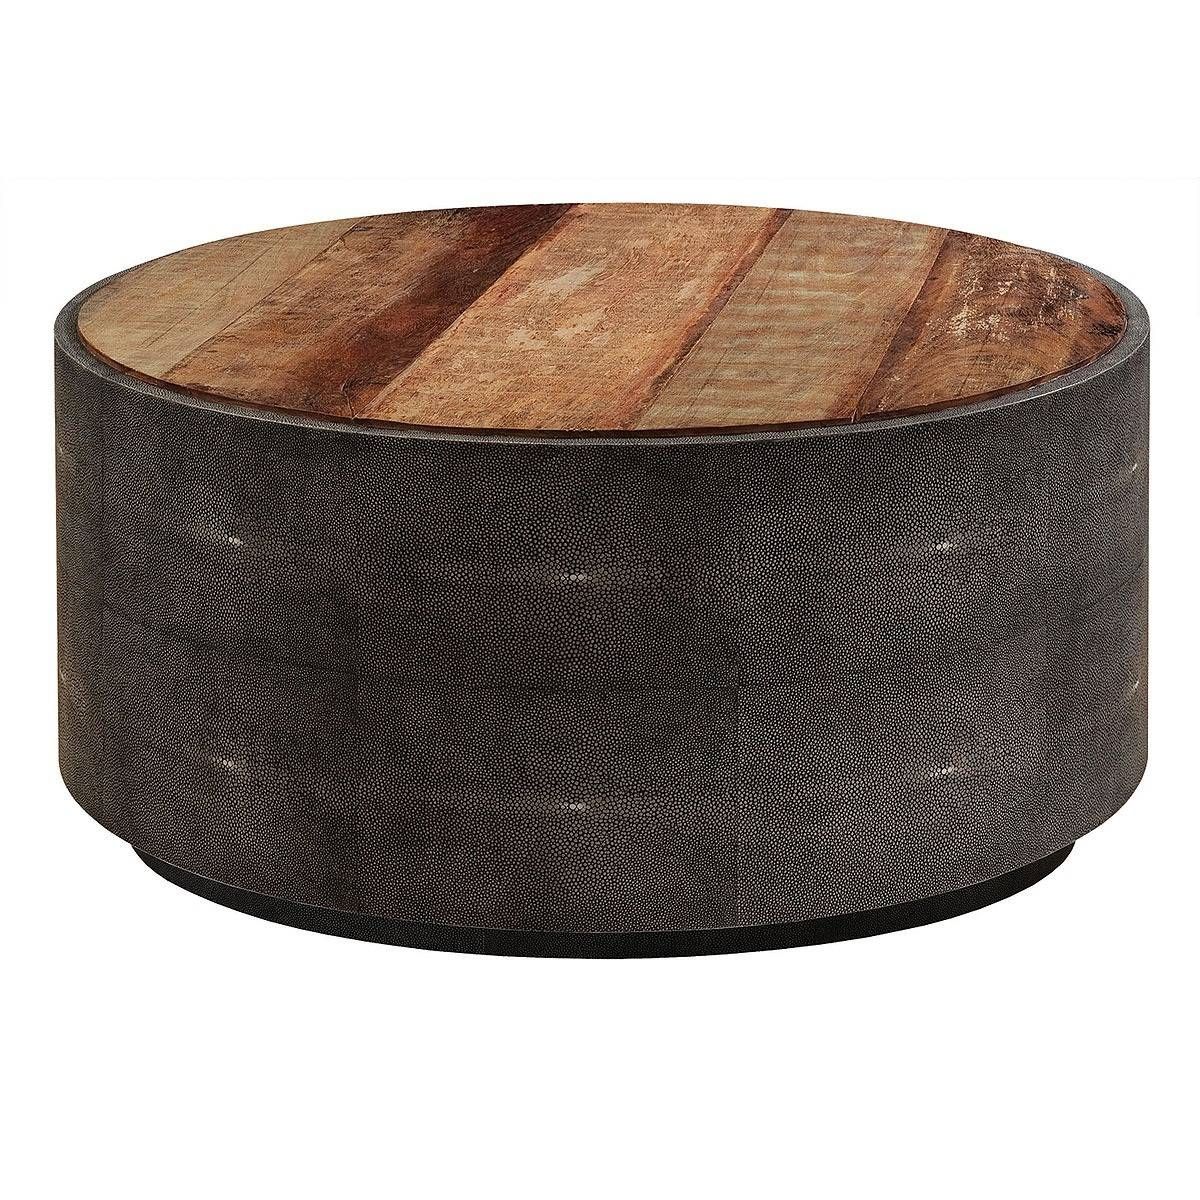 Astonishing Wooden Round Coffee Table Ideas End Tables For In Small Circular Coffee Table (View 20 of 30)